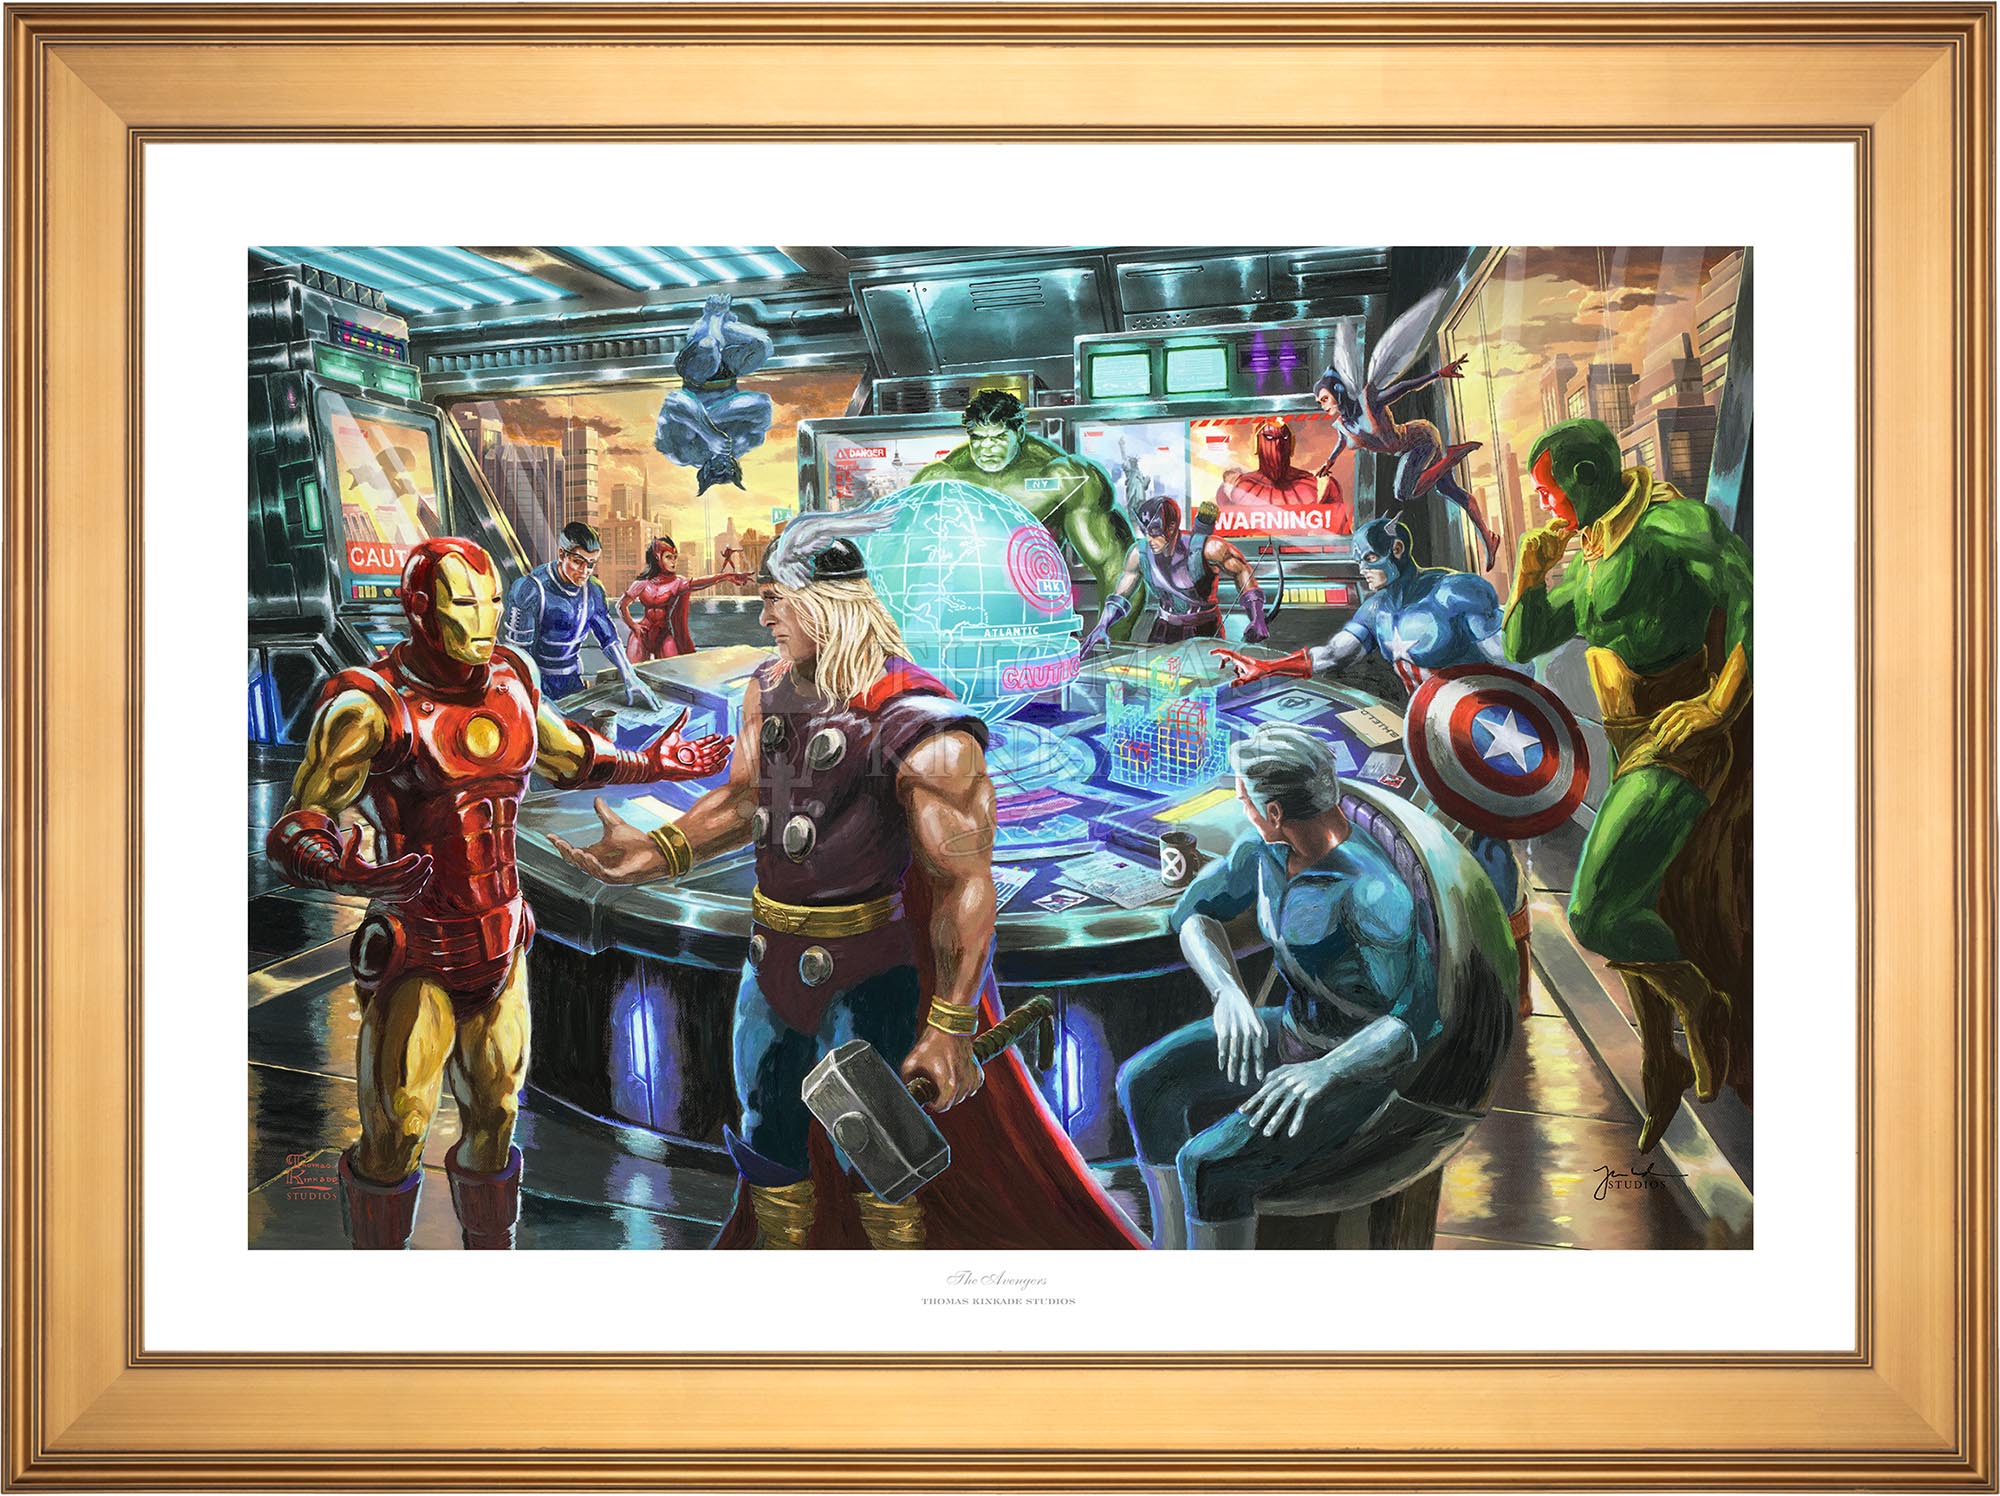 Marvel Movie Poster The Avengers Canvas Wall Art Superhero Characters HD  Print